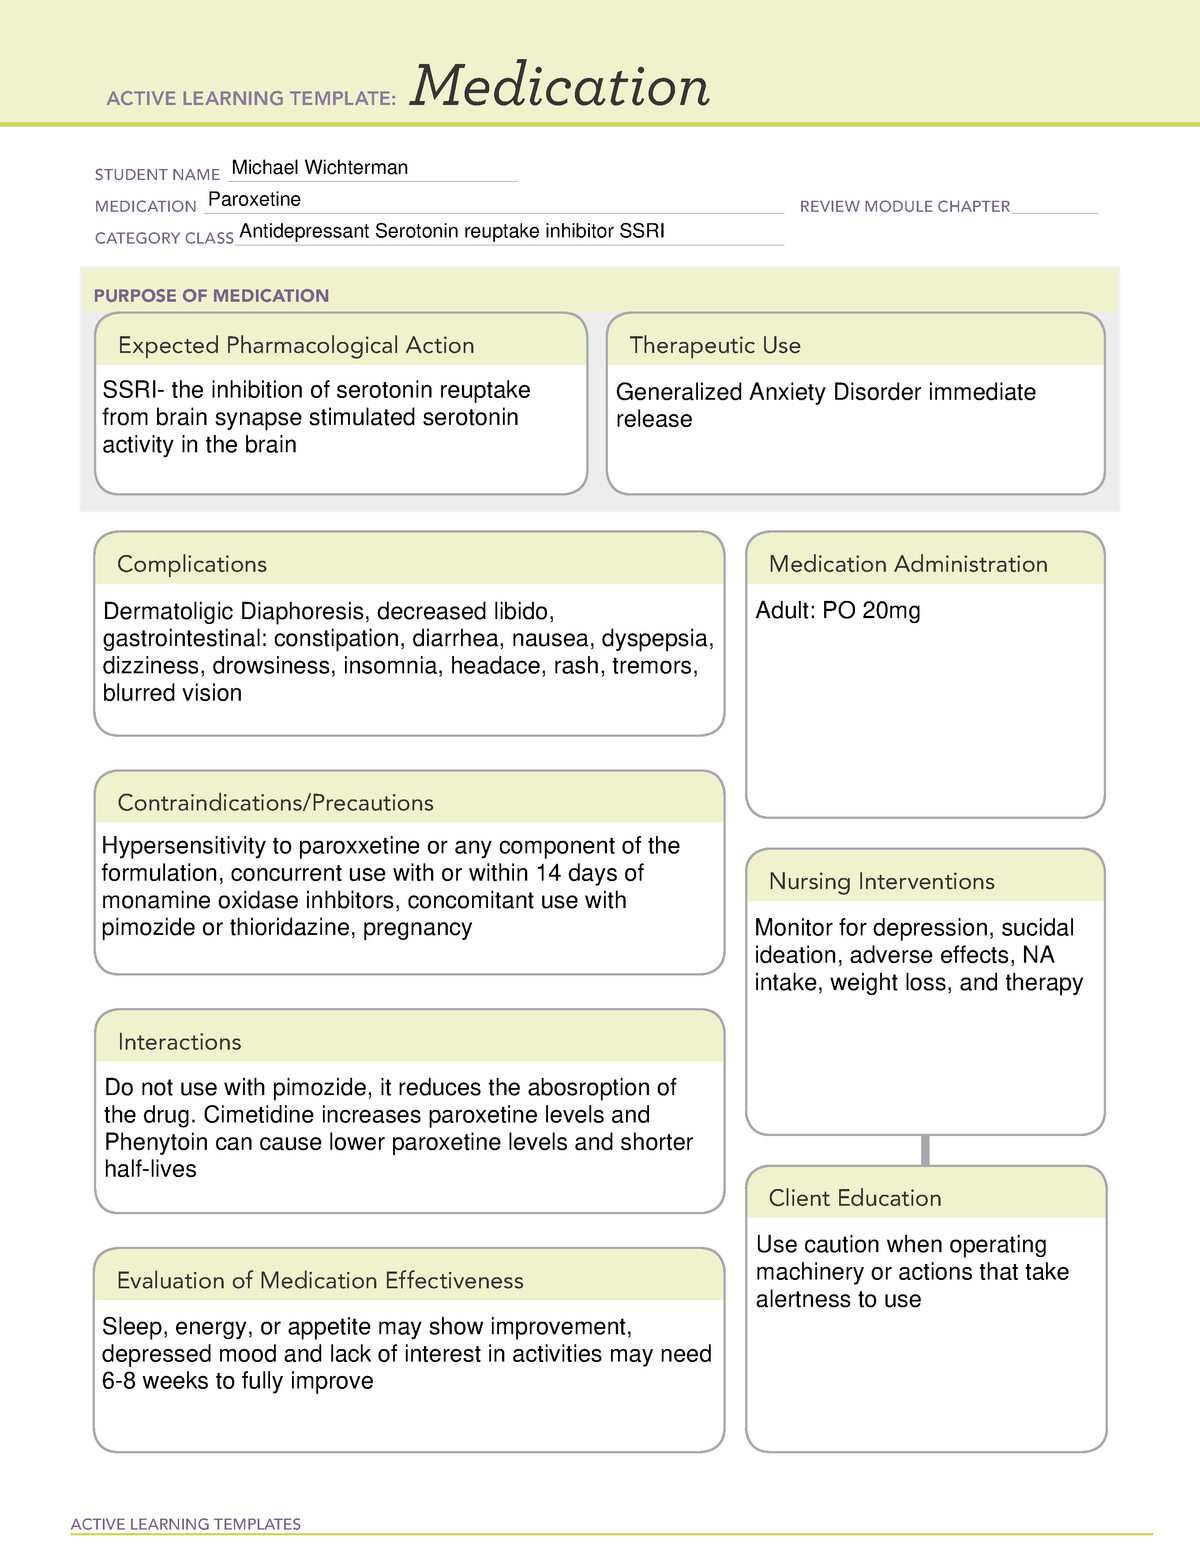 Medication Paroxetine ATI Template ACTIVE LEARNING TEMPLATES